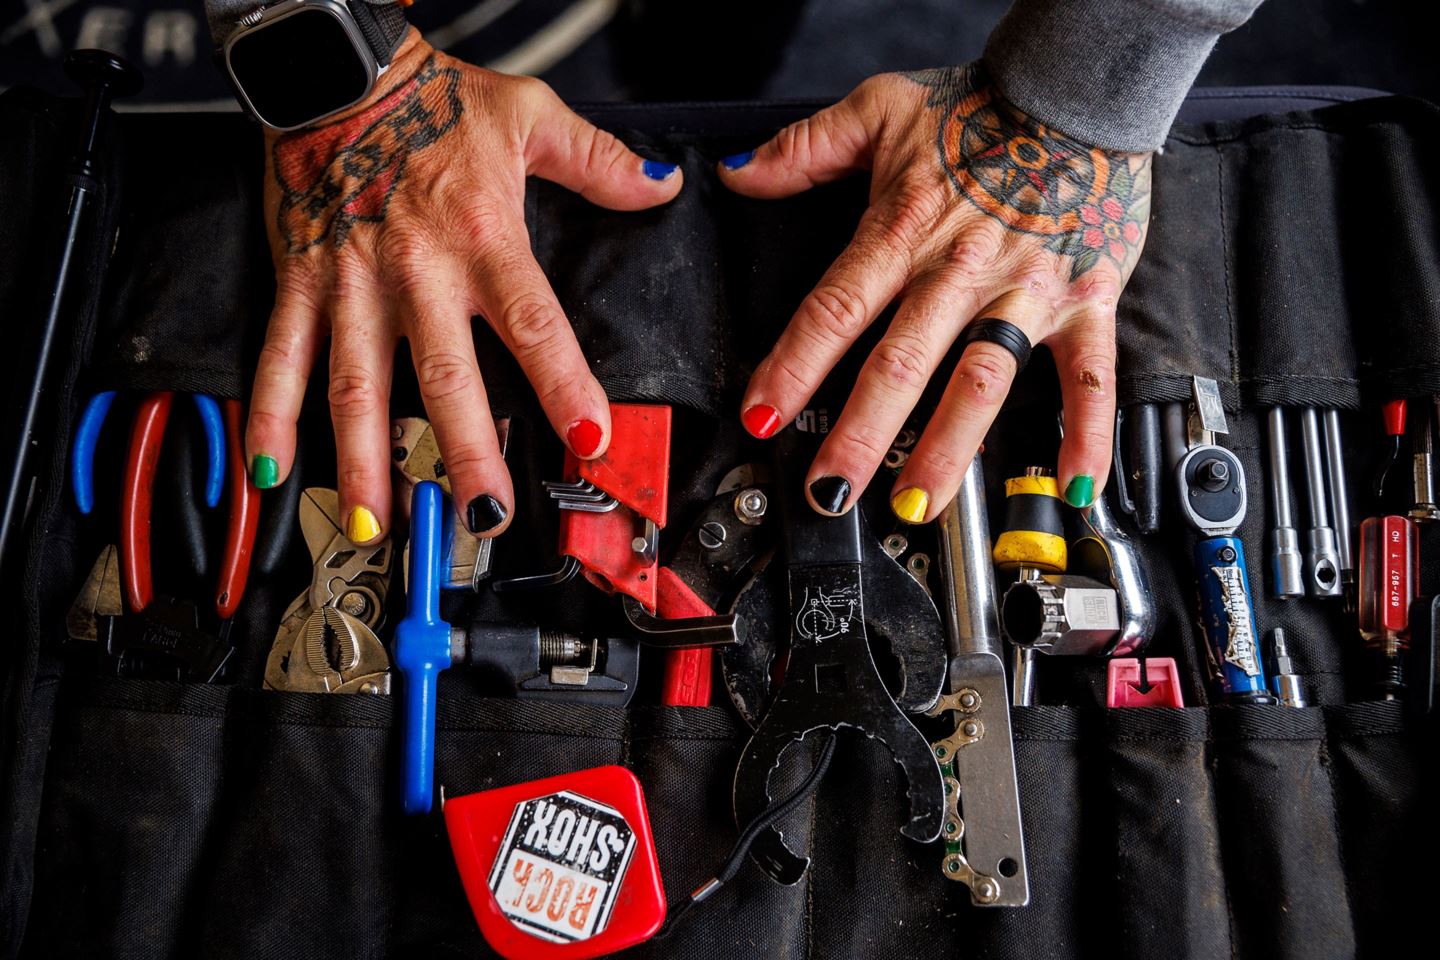 JT Evans' (Tegan's mechanic) hands with nails painted like the rainbow stripes over his set of tools.